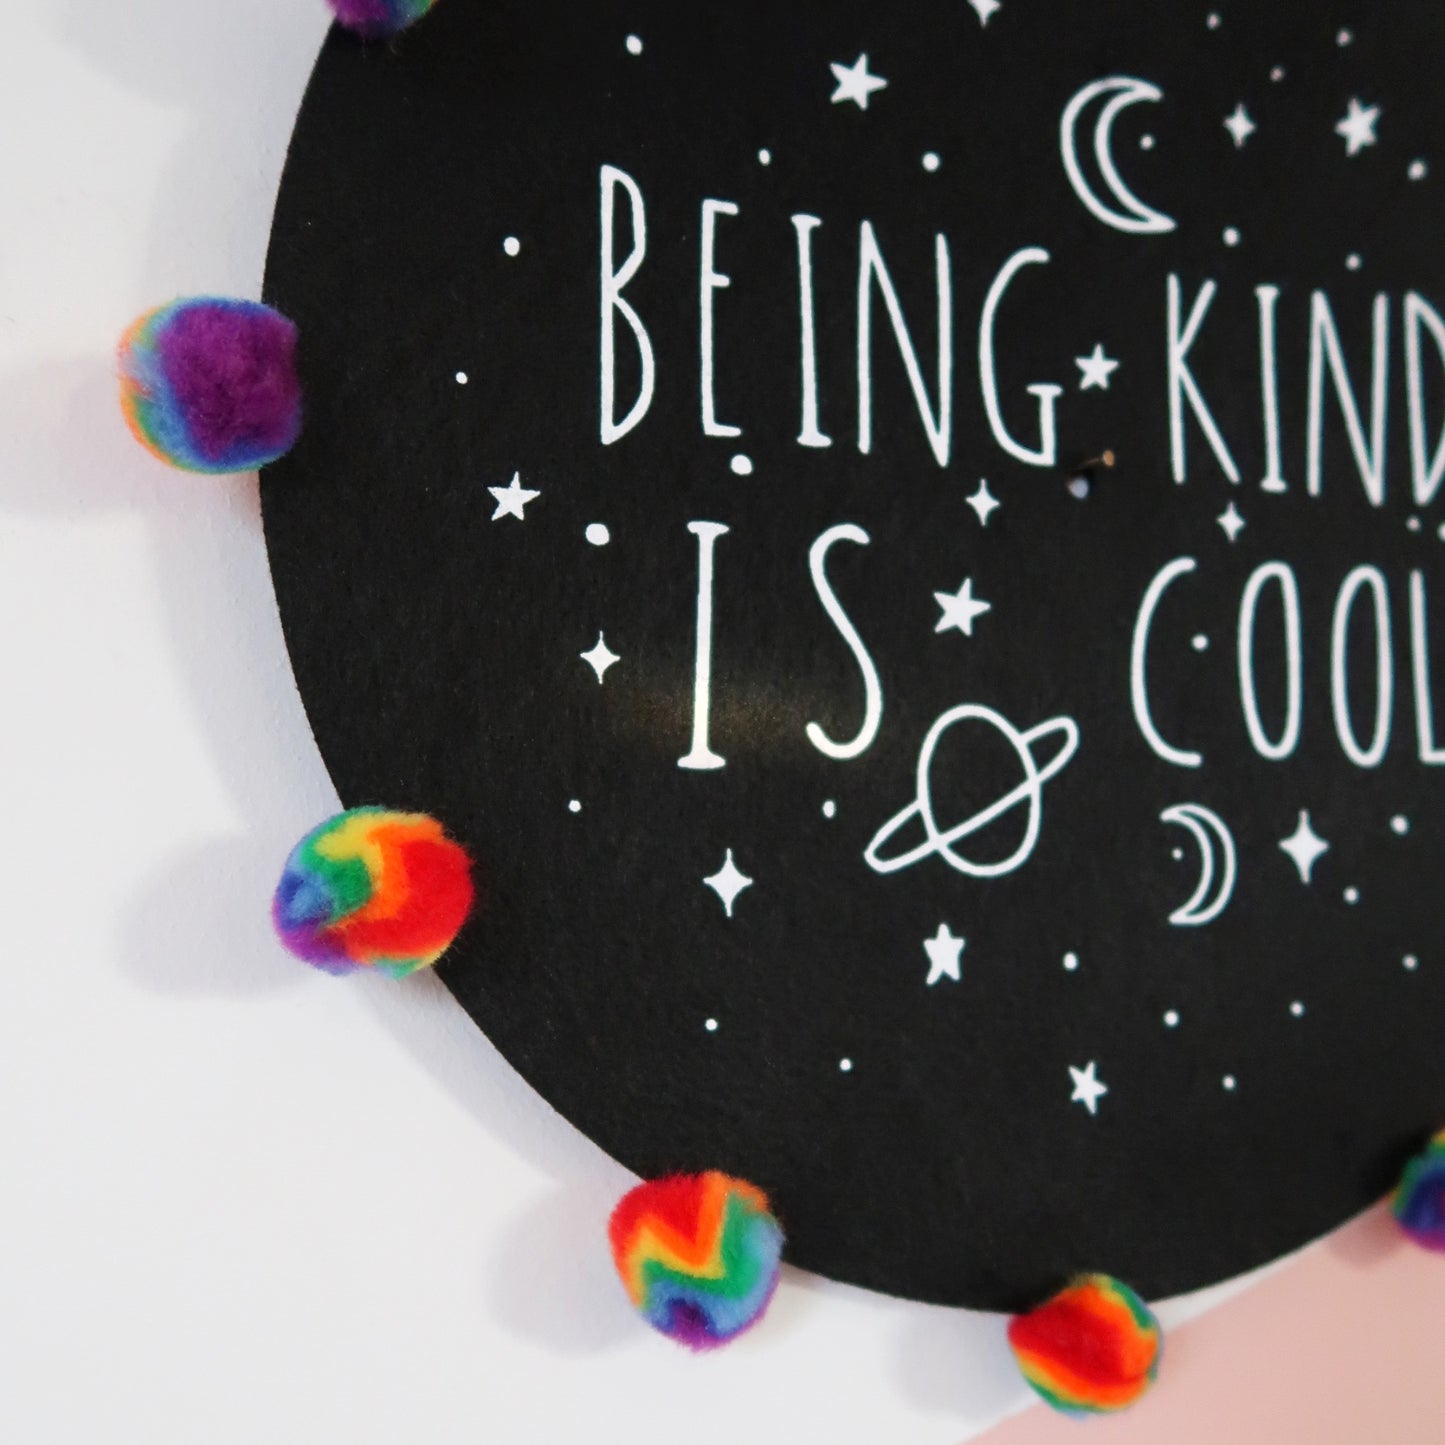 being kind is cool wall decor